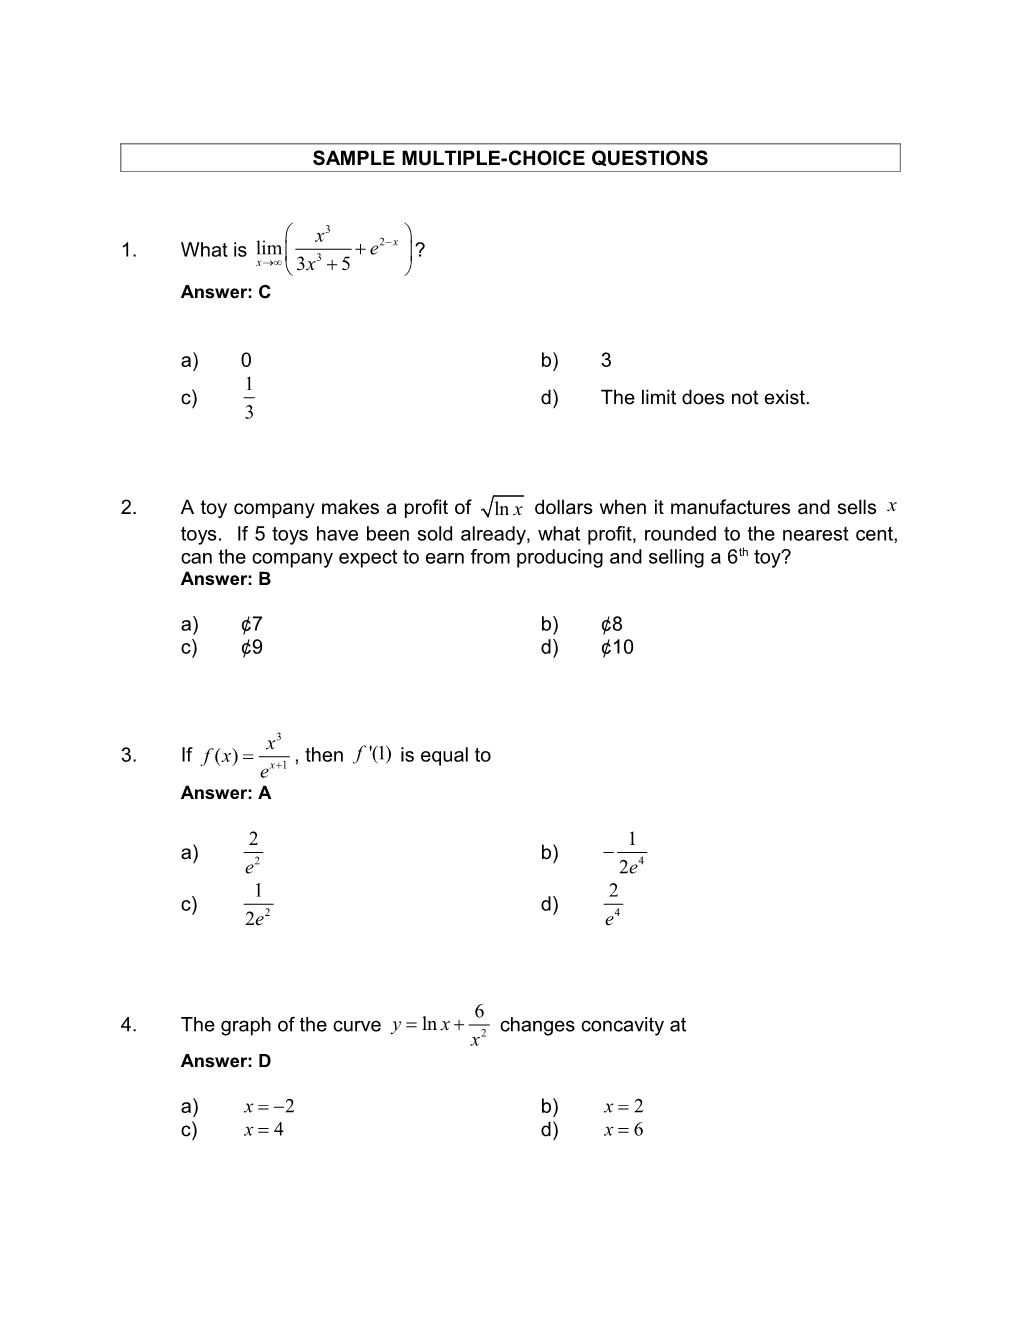 Sample Multiple-Choice Questions